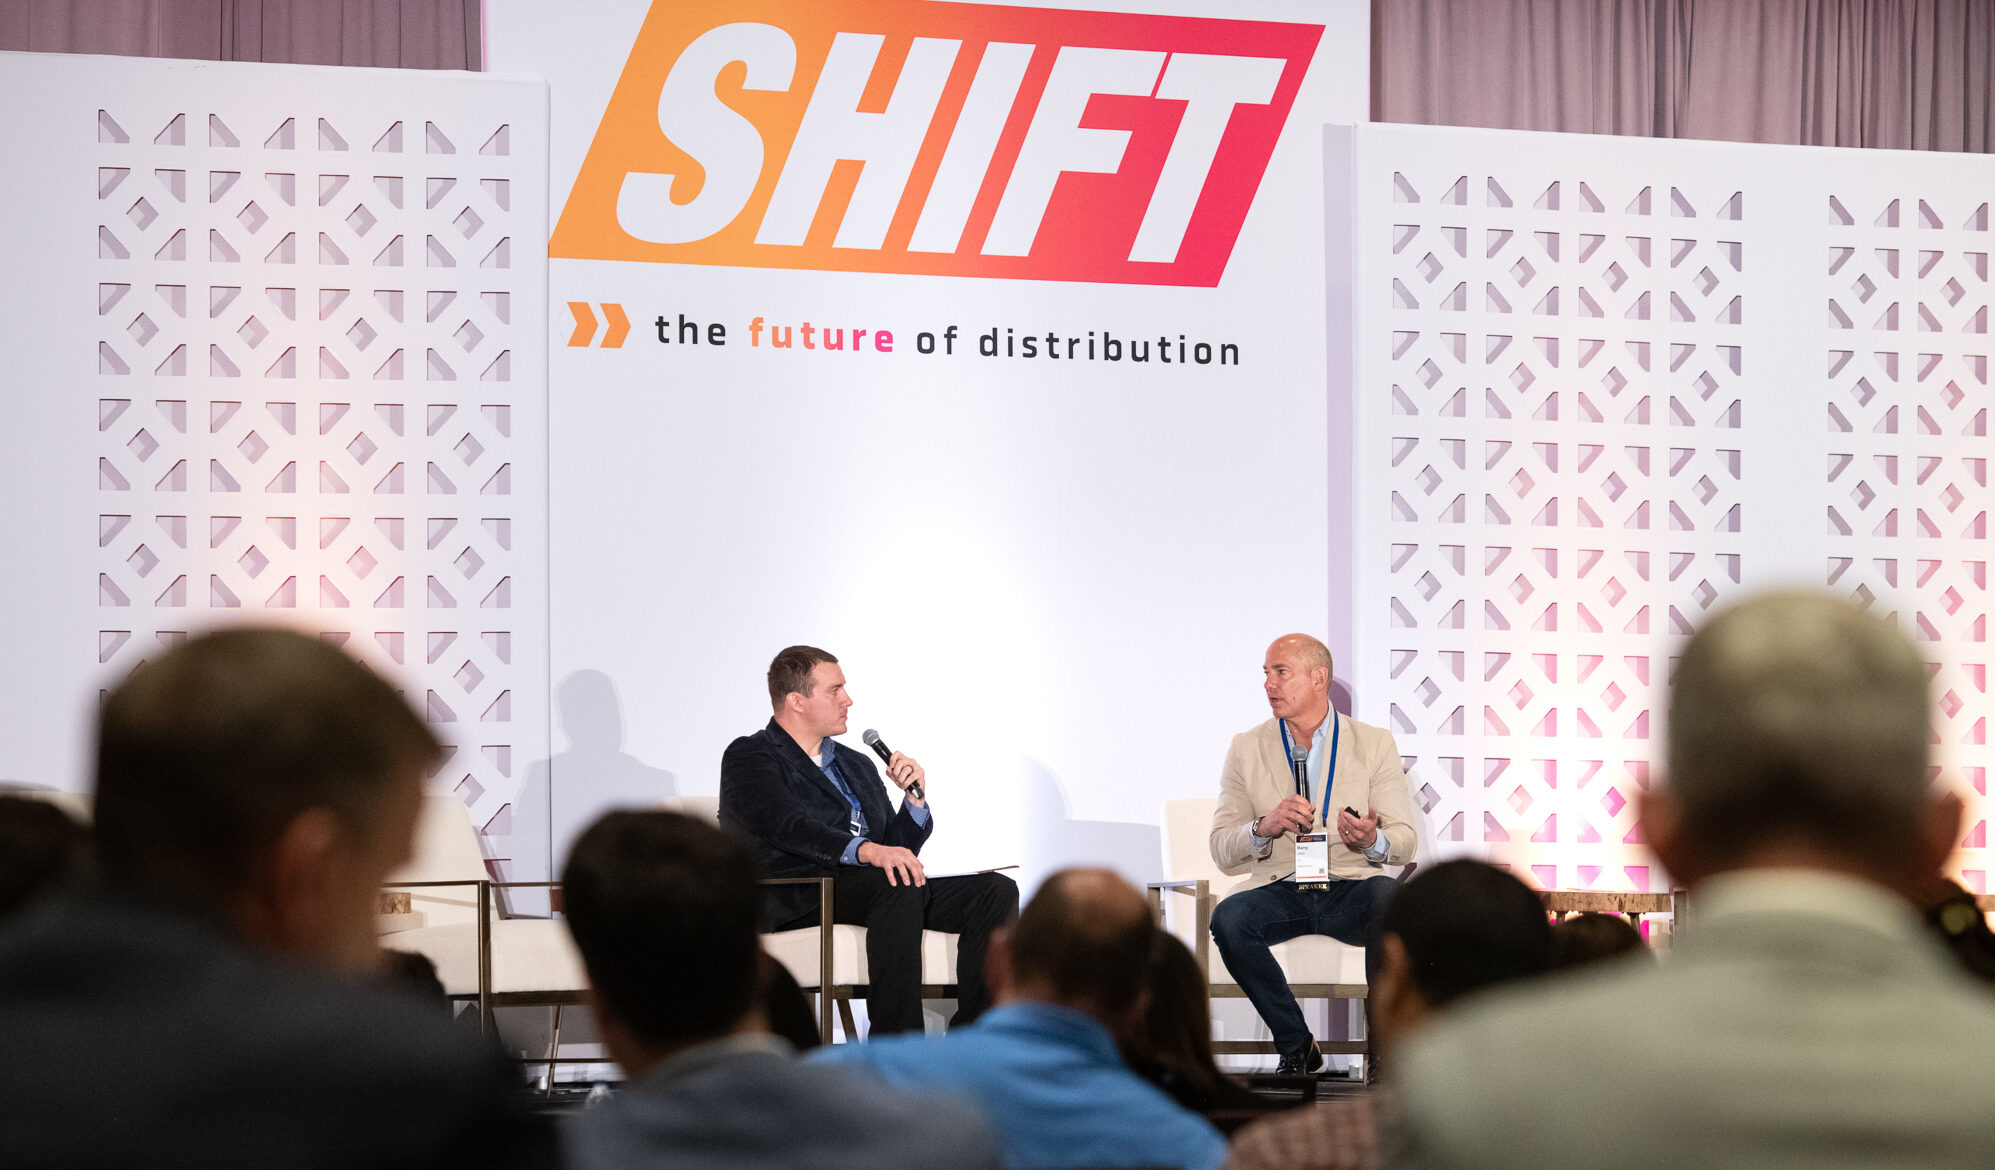 MDM Executive Editor Mike Hockett (left) interviews Global Industrial Company CEO Barry Litwin (right) on stage during MDM's 2023 SHIFT conference Sept. 20 in Denver. (MDM Photo)